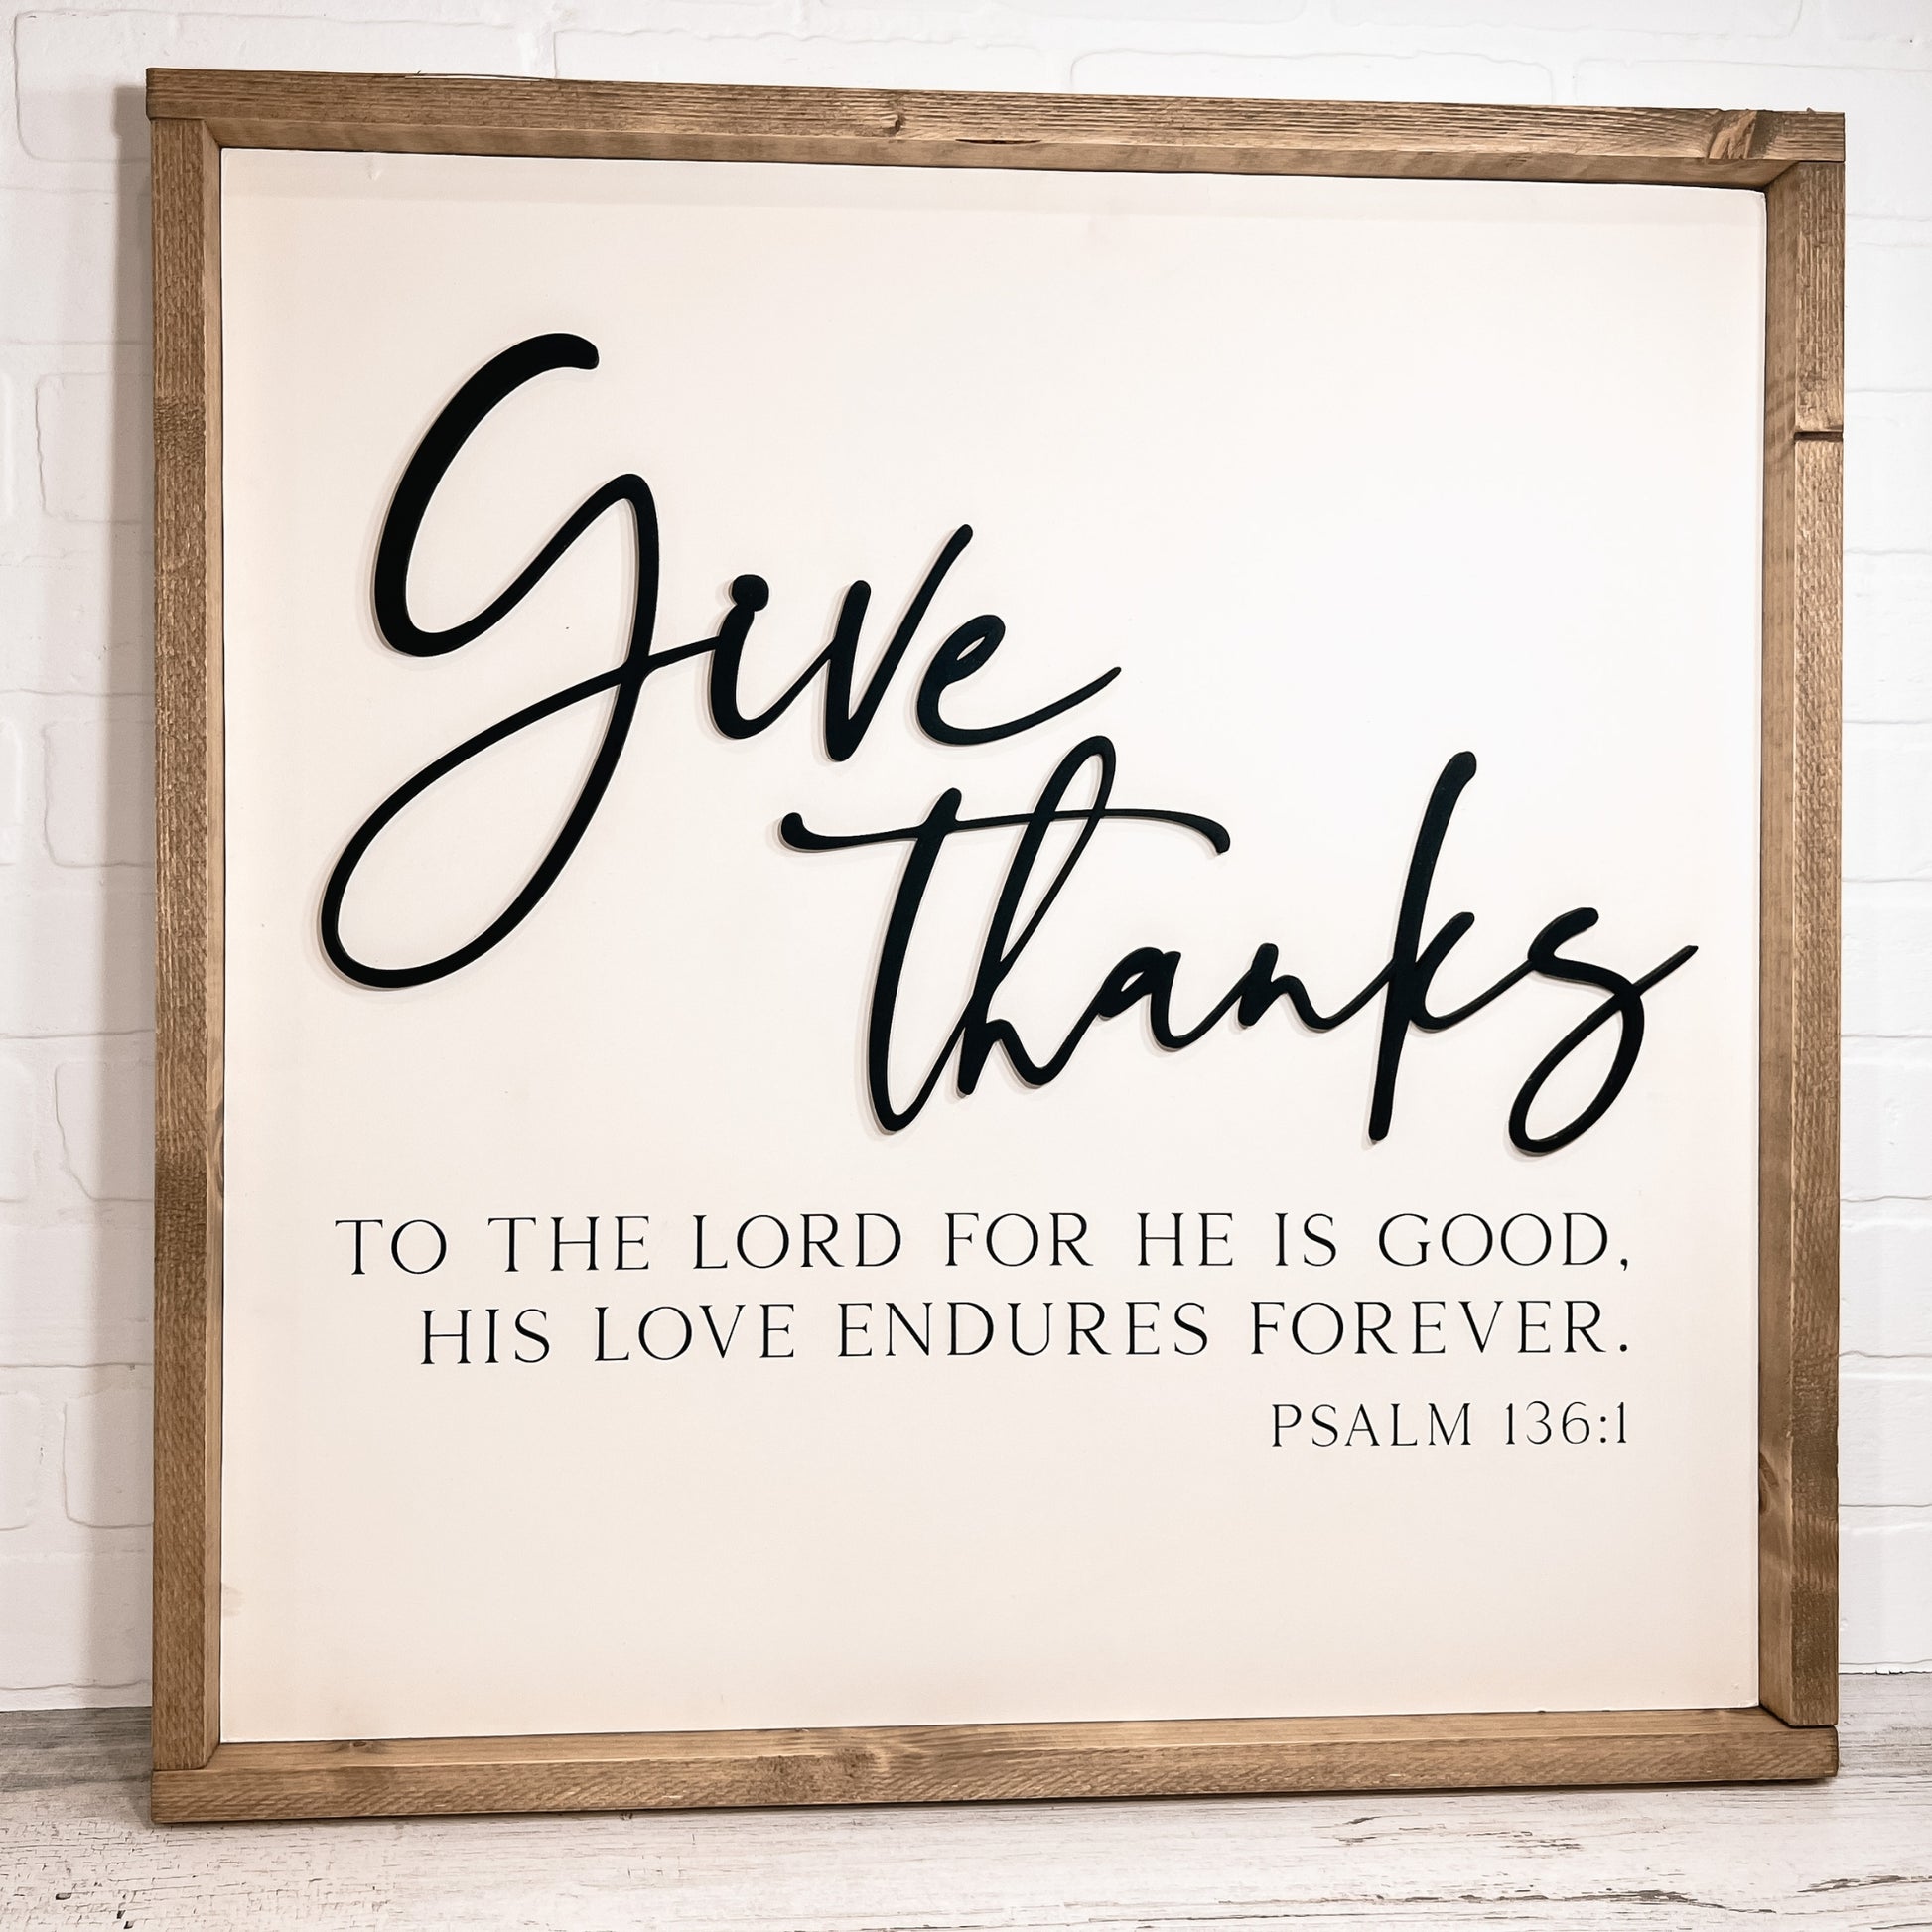 Give Thanks - B-Cozy Home Decor